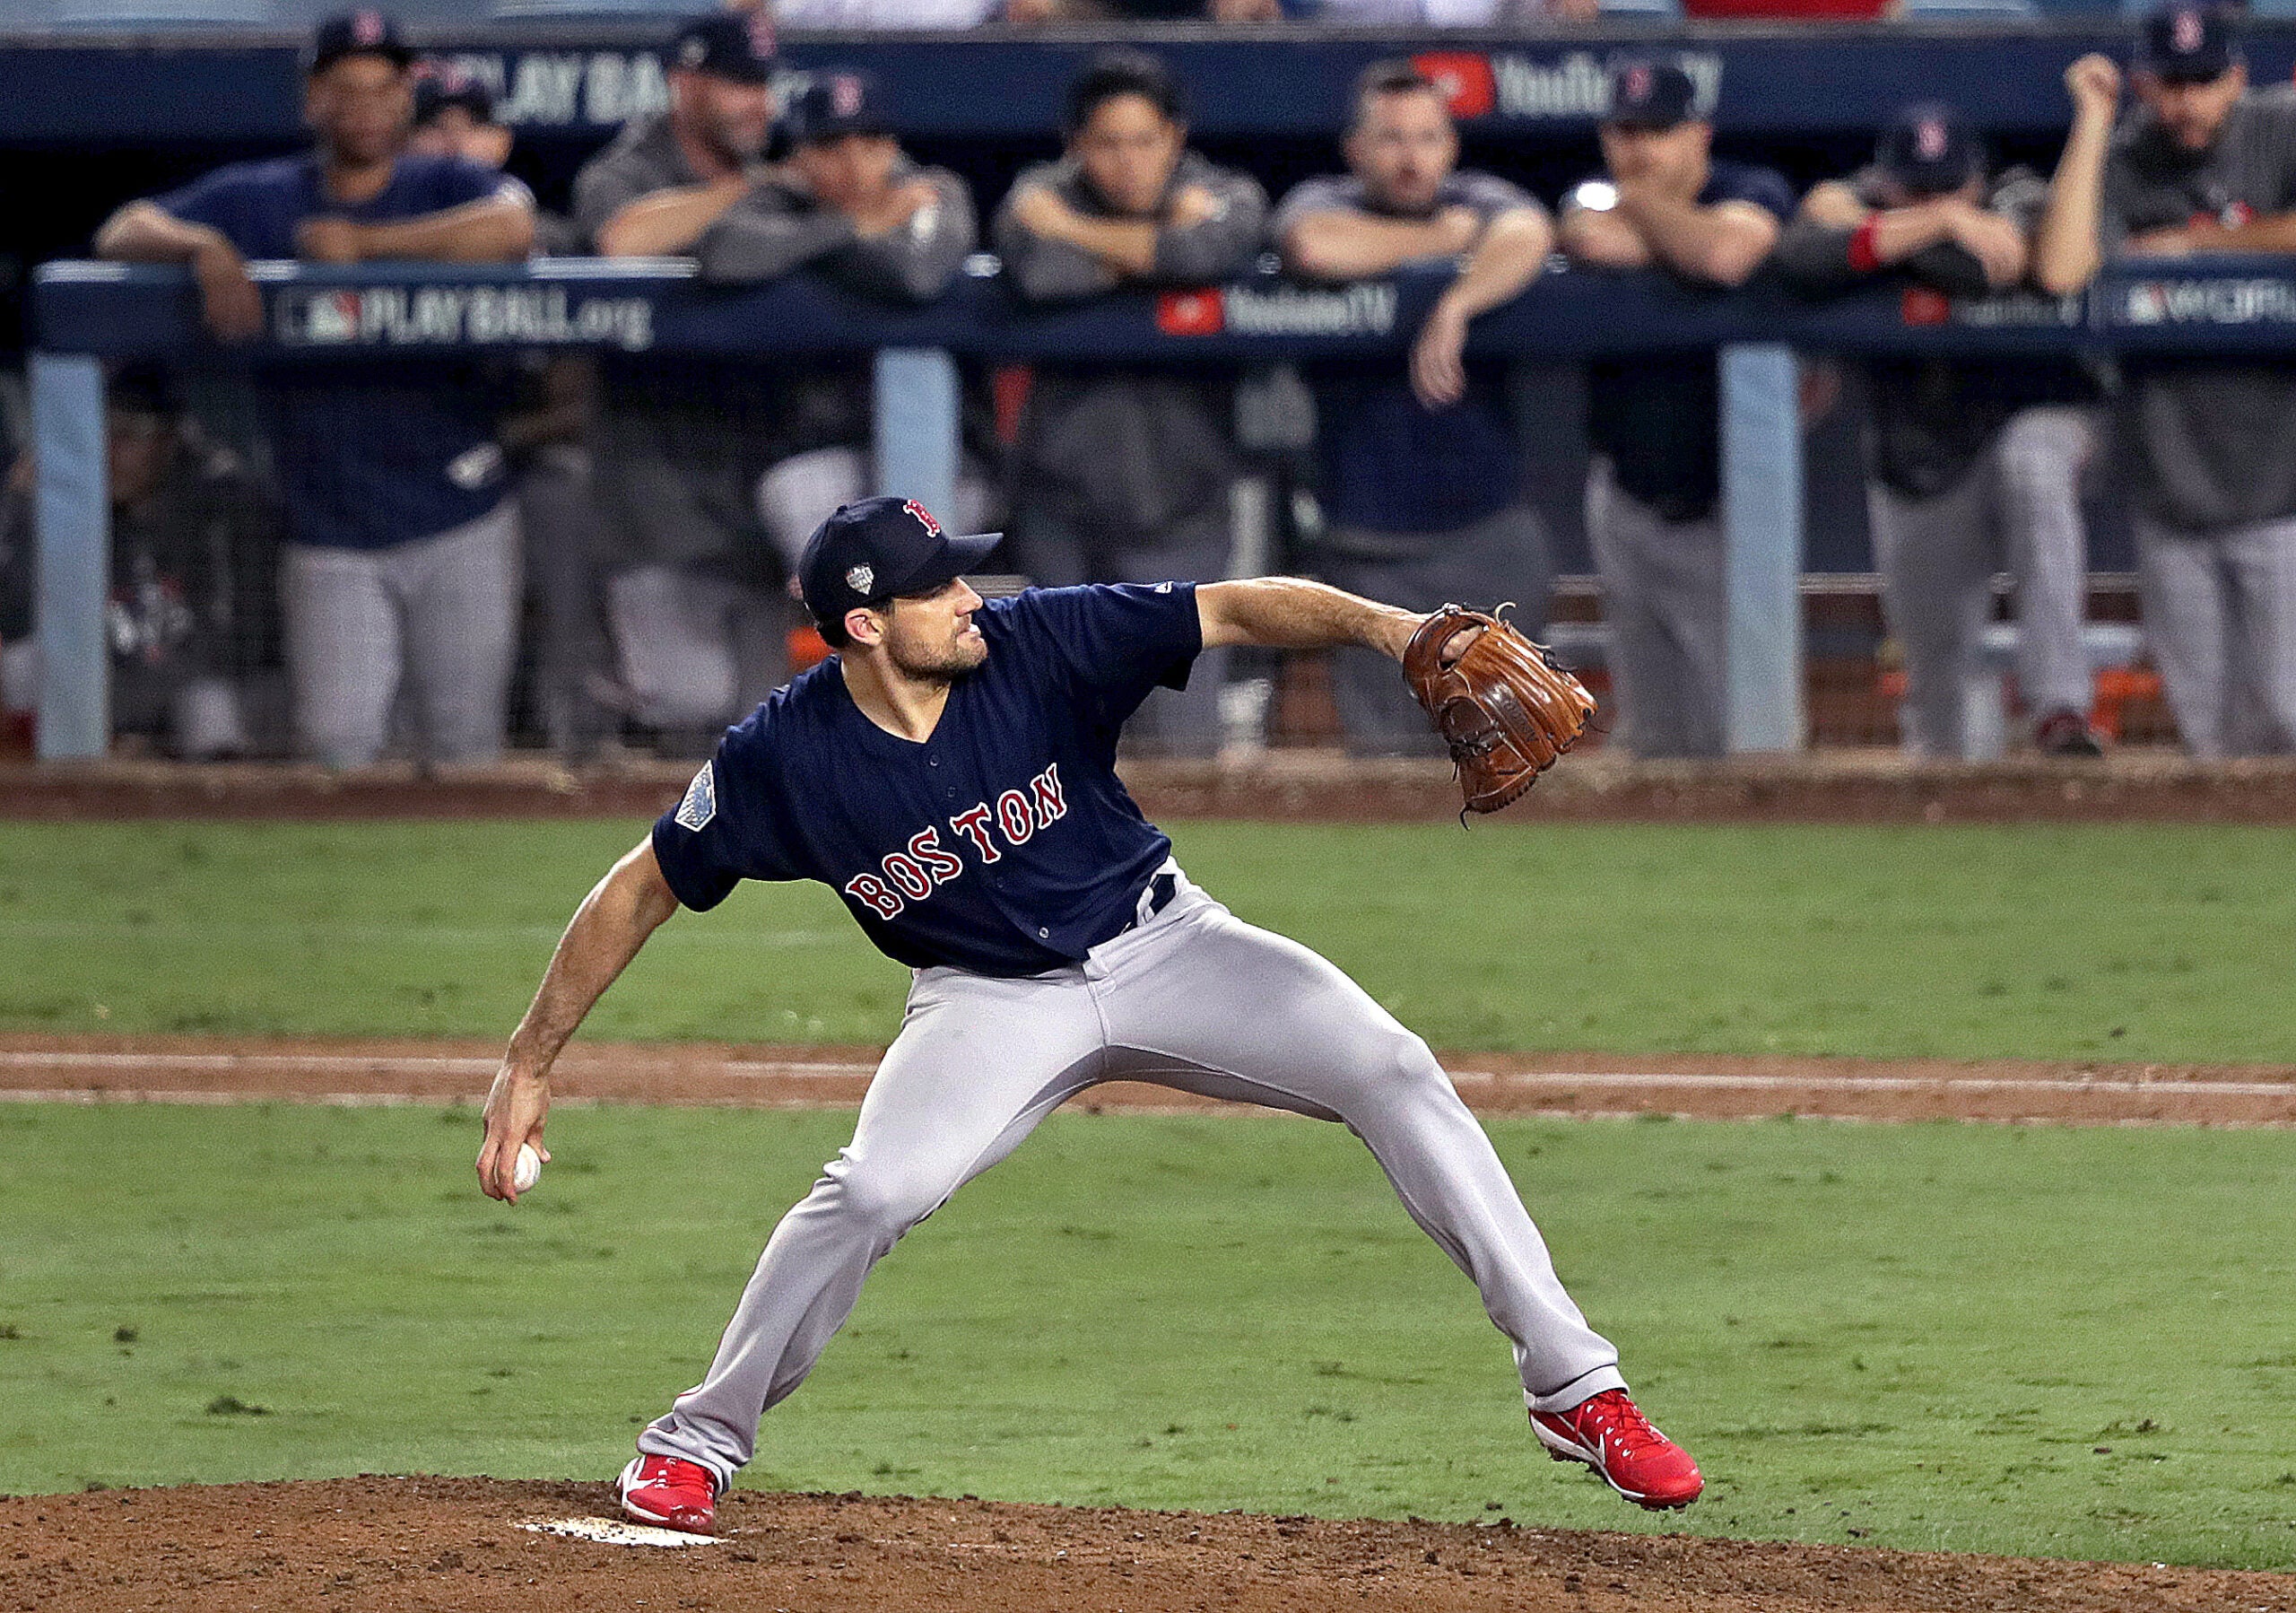 In Game 2 win, Nathan Eovaldi did what he's done all postseason